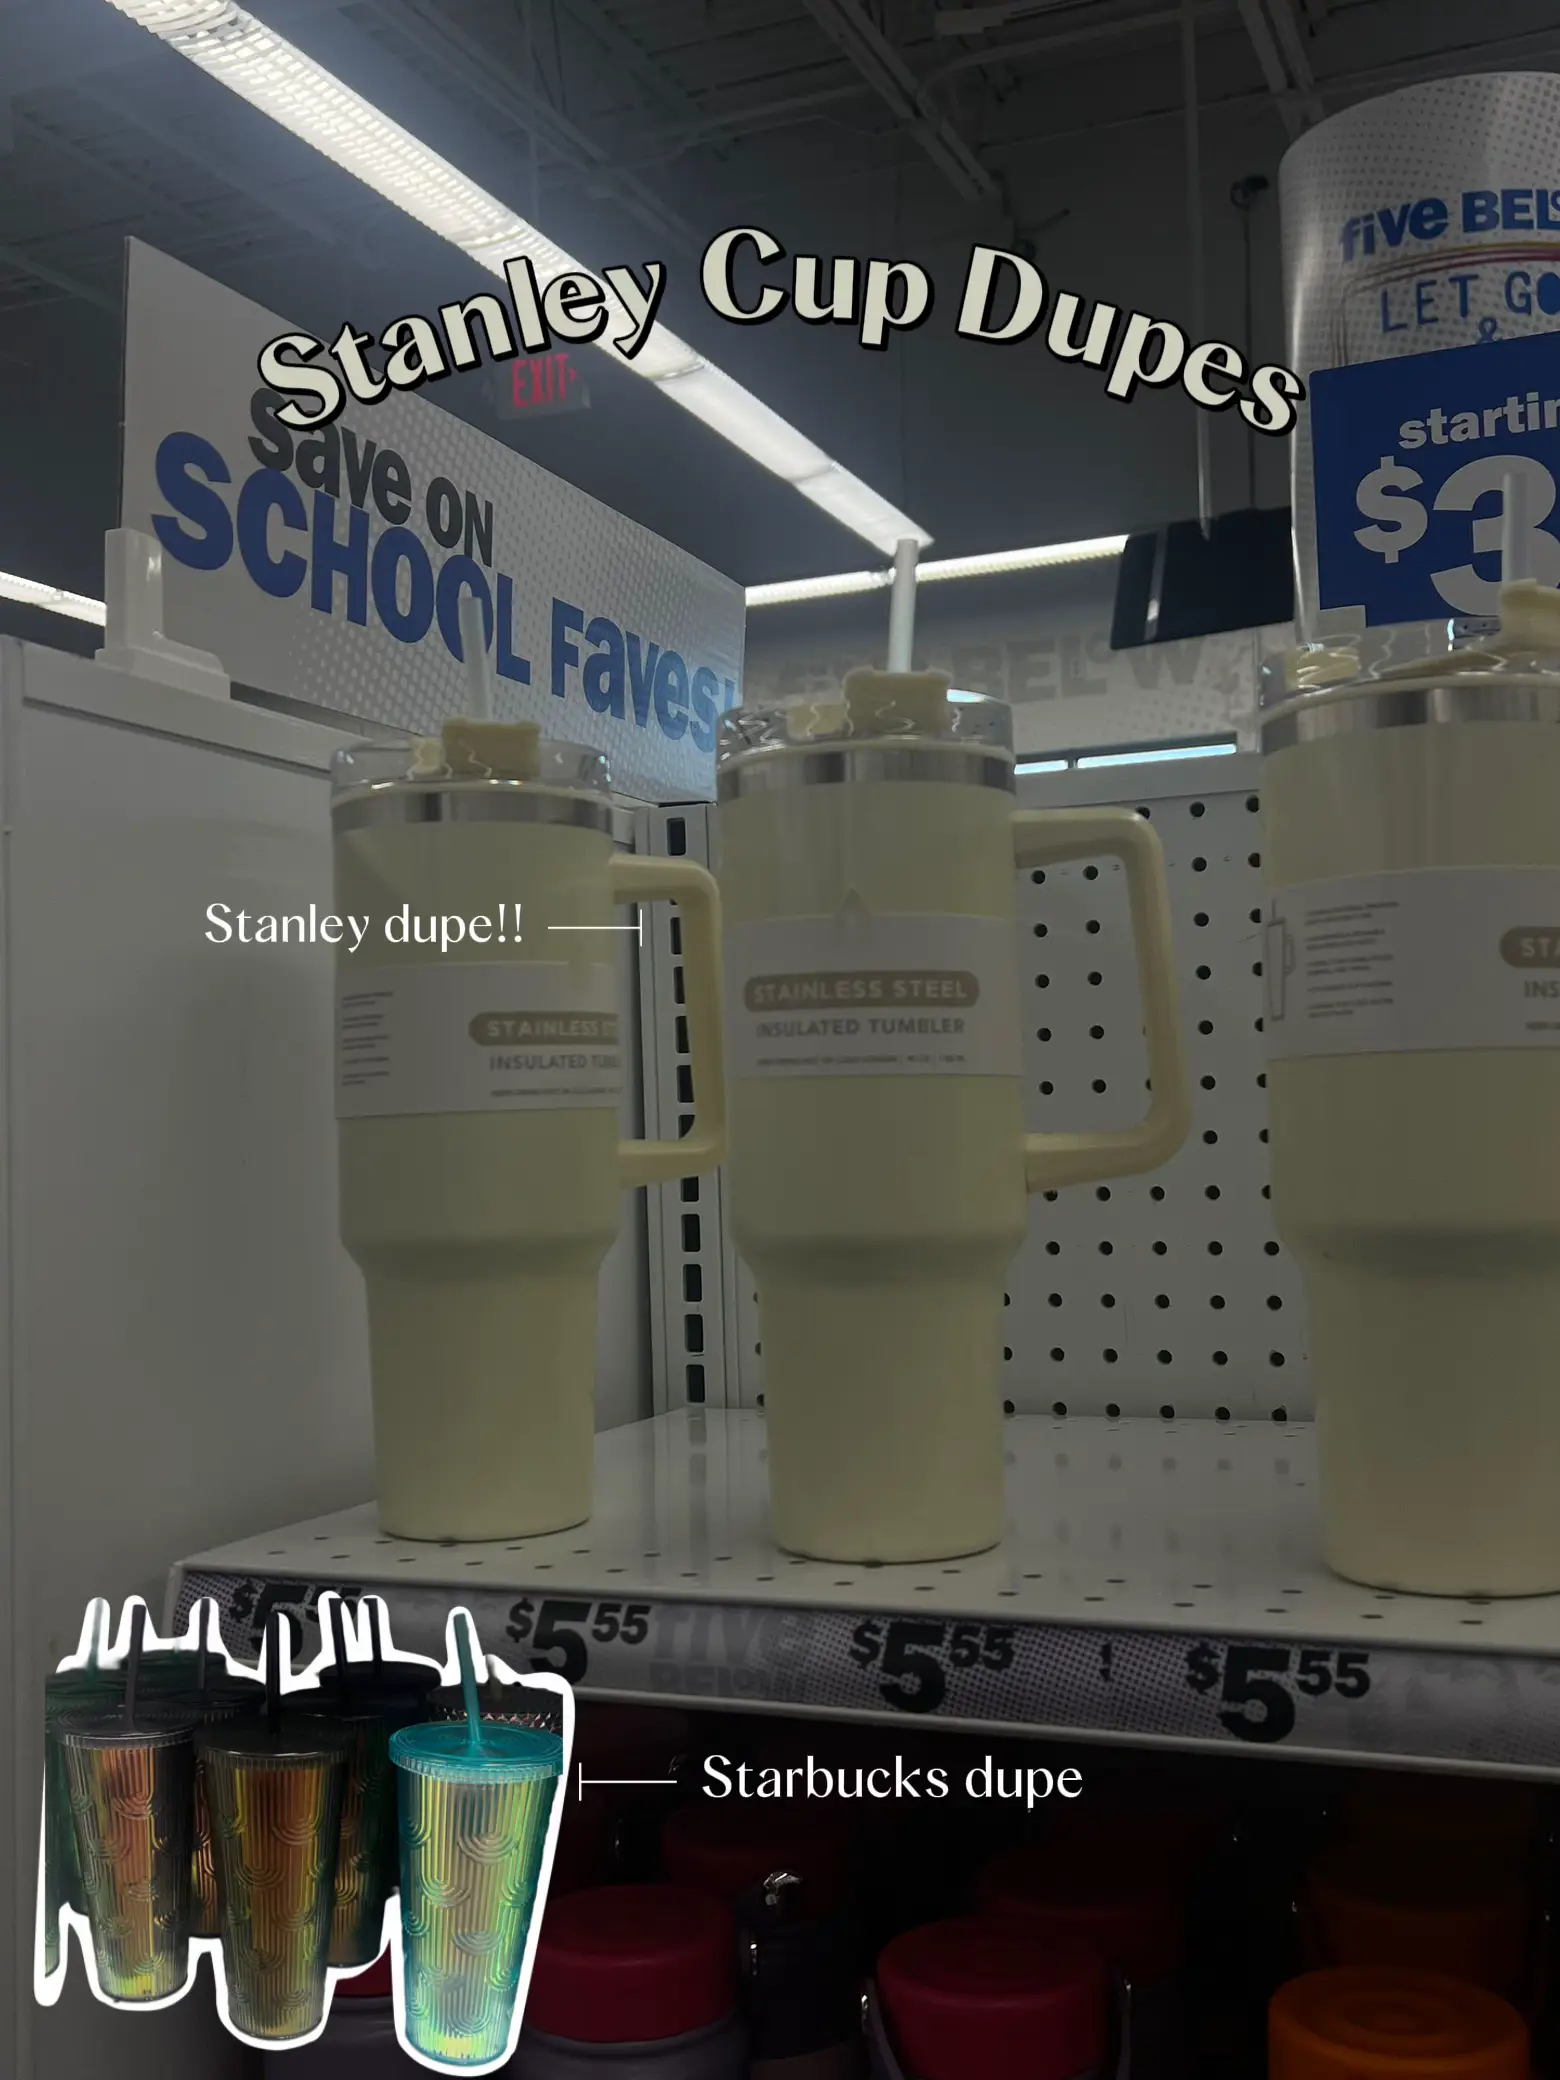 Five Below's Stanley Cup Dupe Is Back in Stock in New Colors